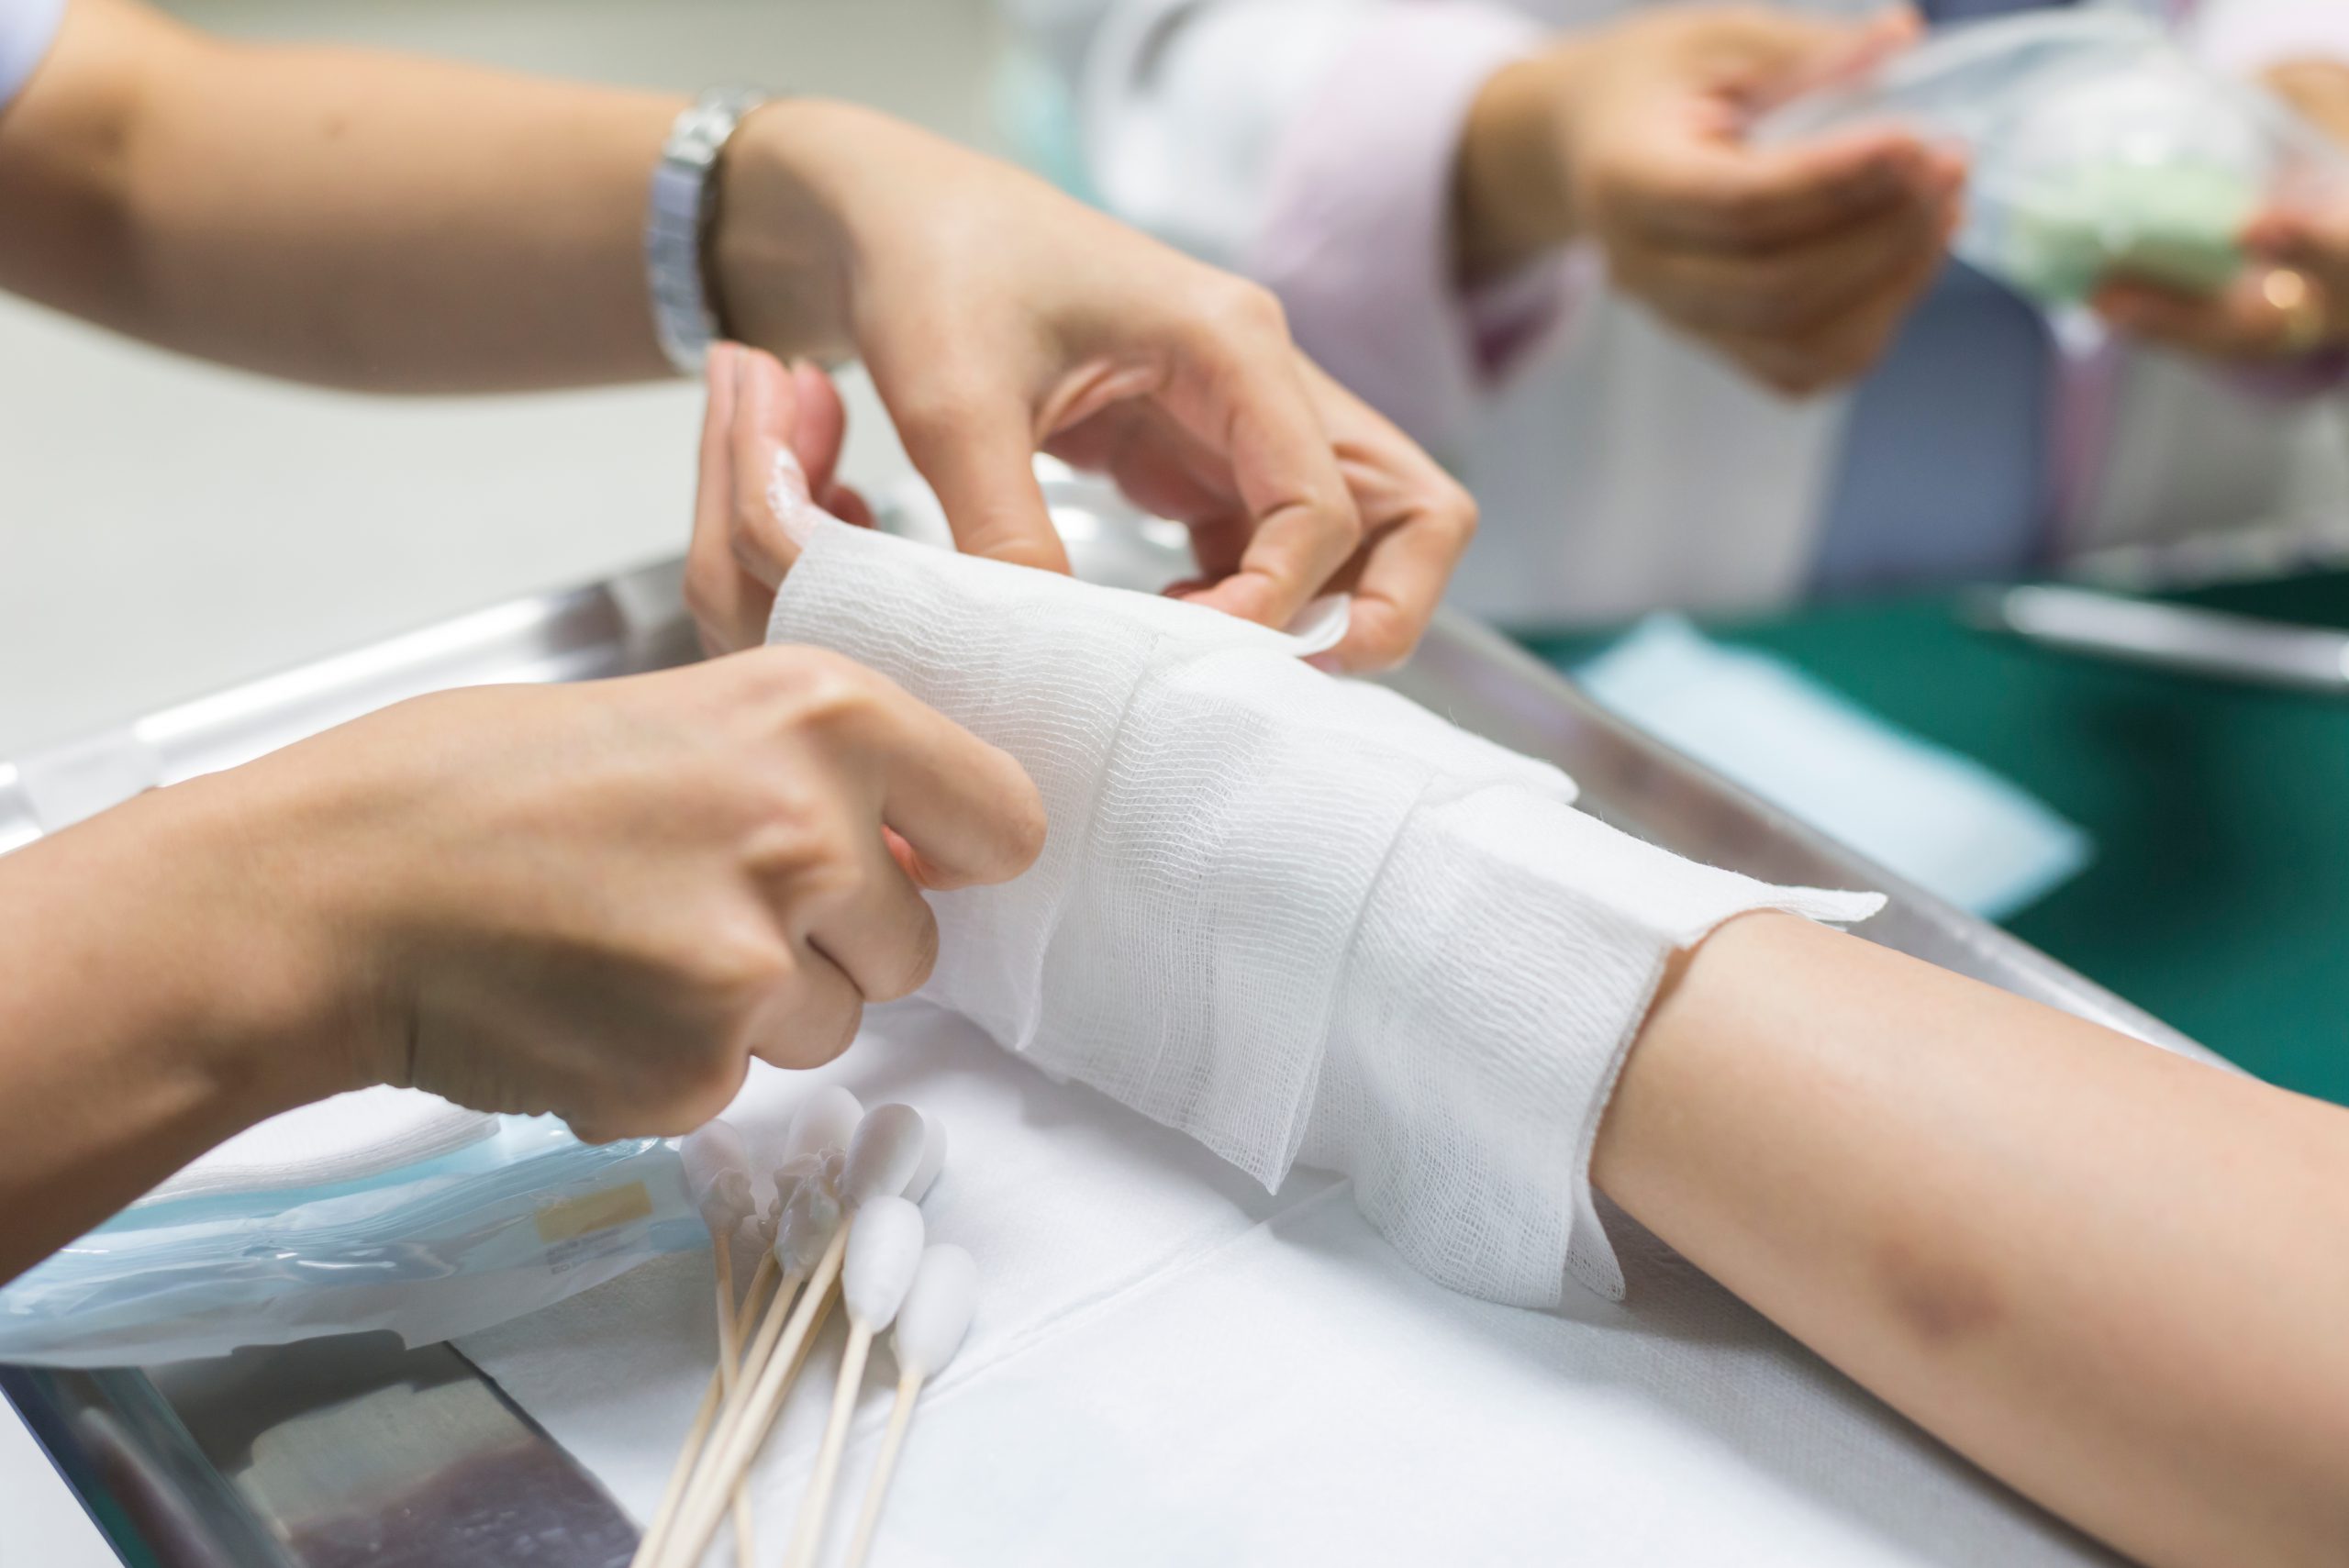 New EPSRC project set to transform the treatment of chronic wounds with personalised ‘smart dressings’